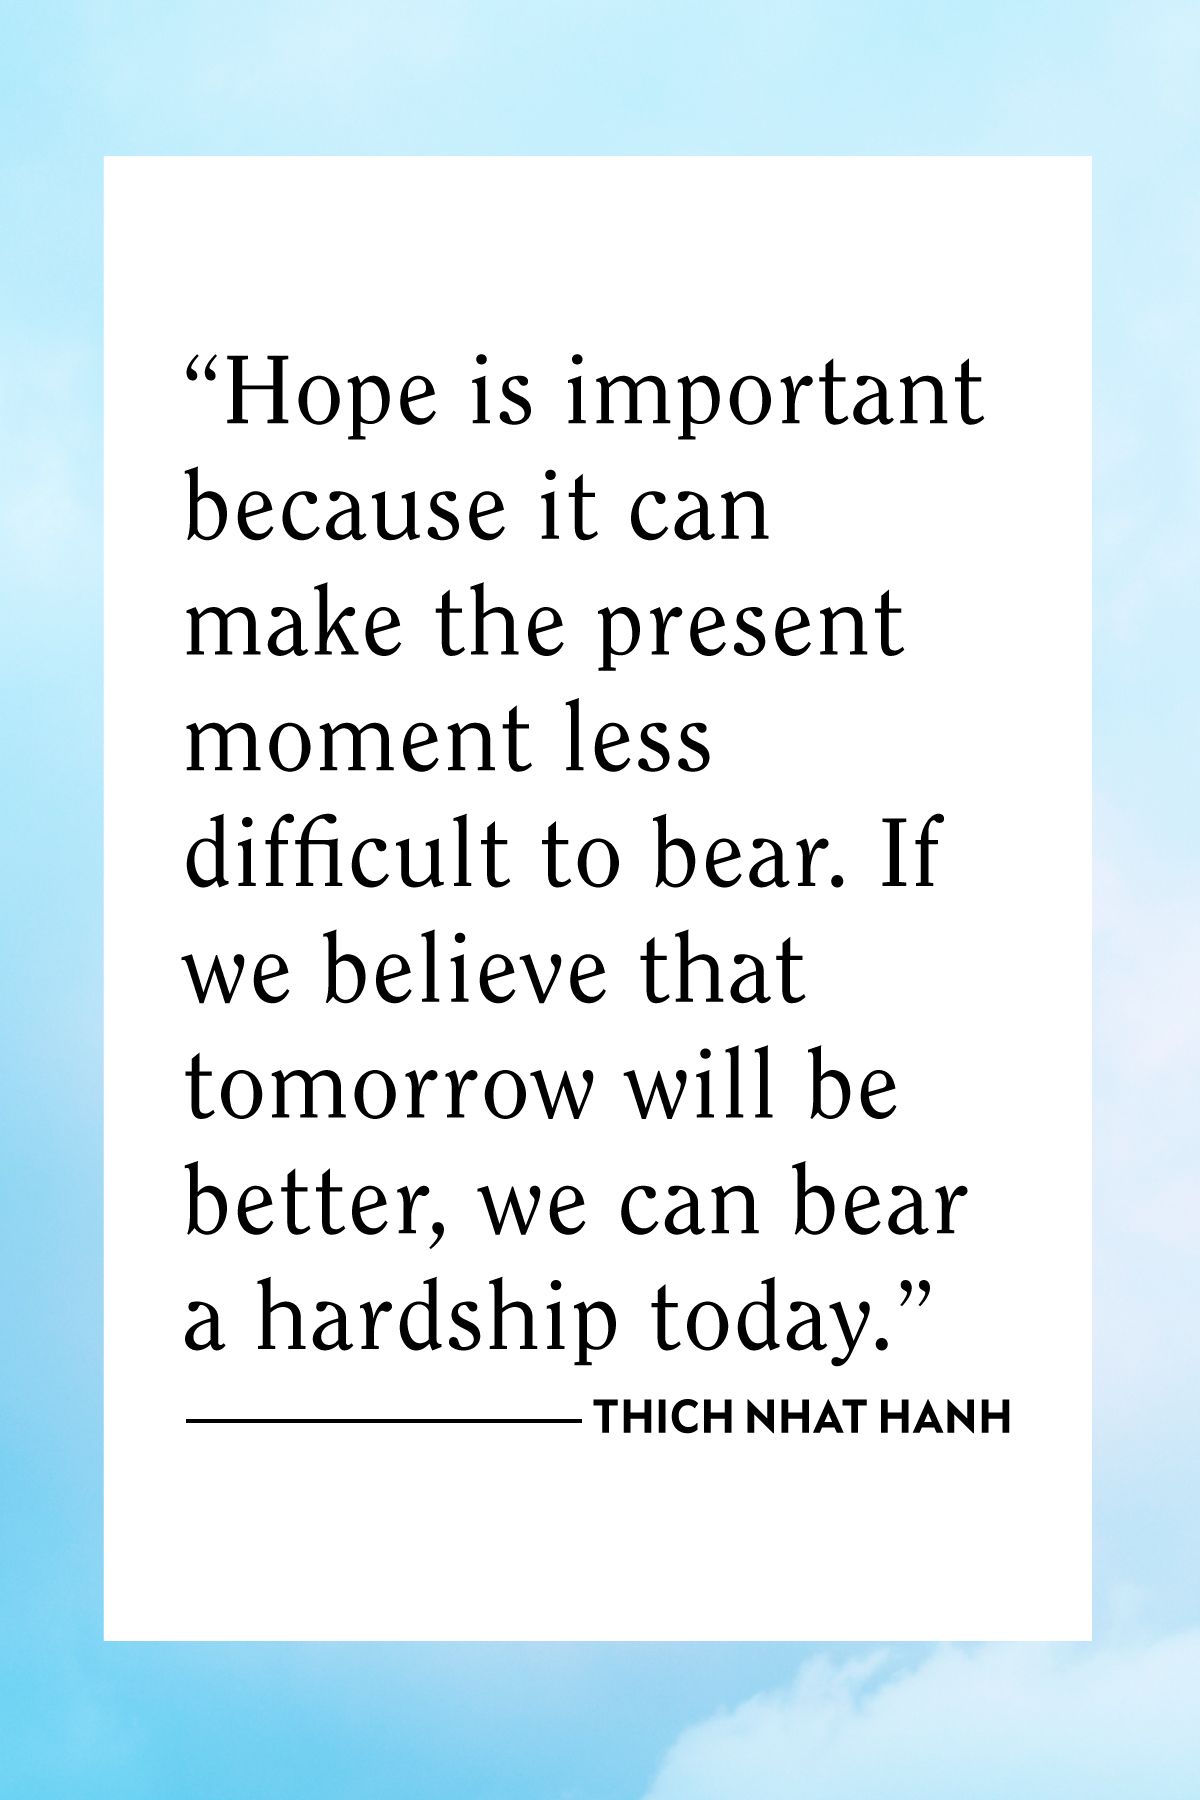 quotes about suffering and hope